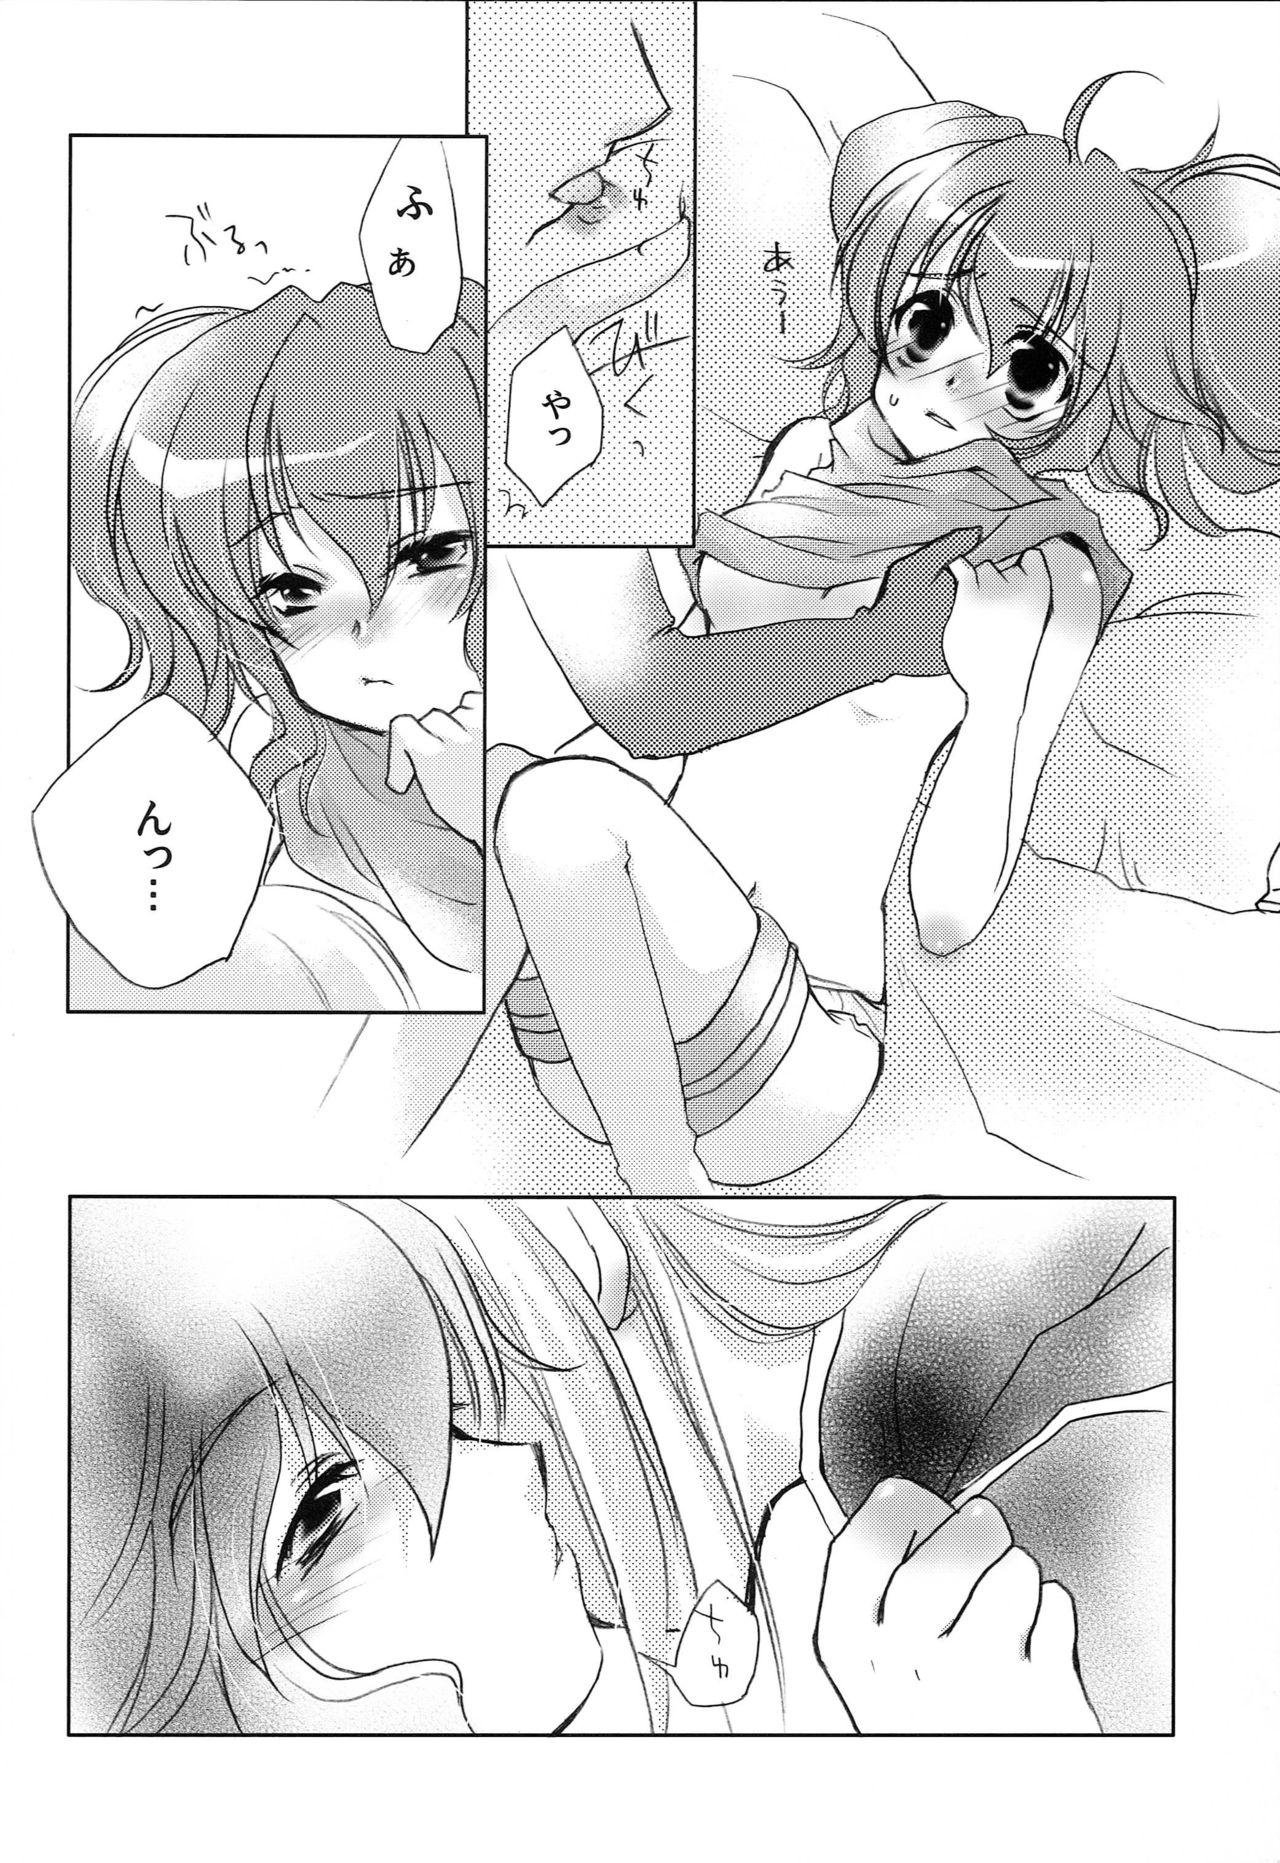 Girl Sucking Dick Carnation, Lily, Lily, Rose - Tales of the abyss Boy Fuck Girl - Page 9